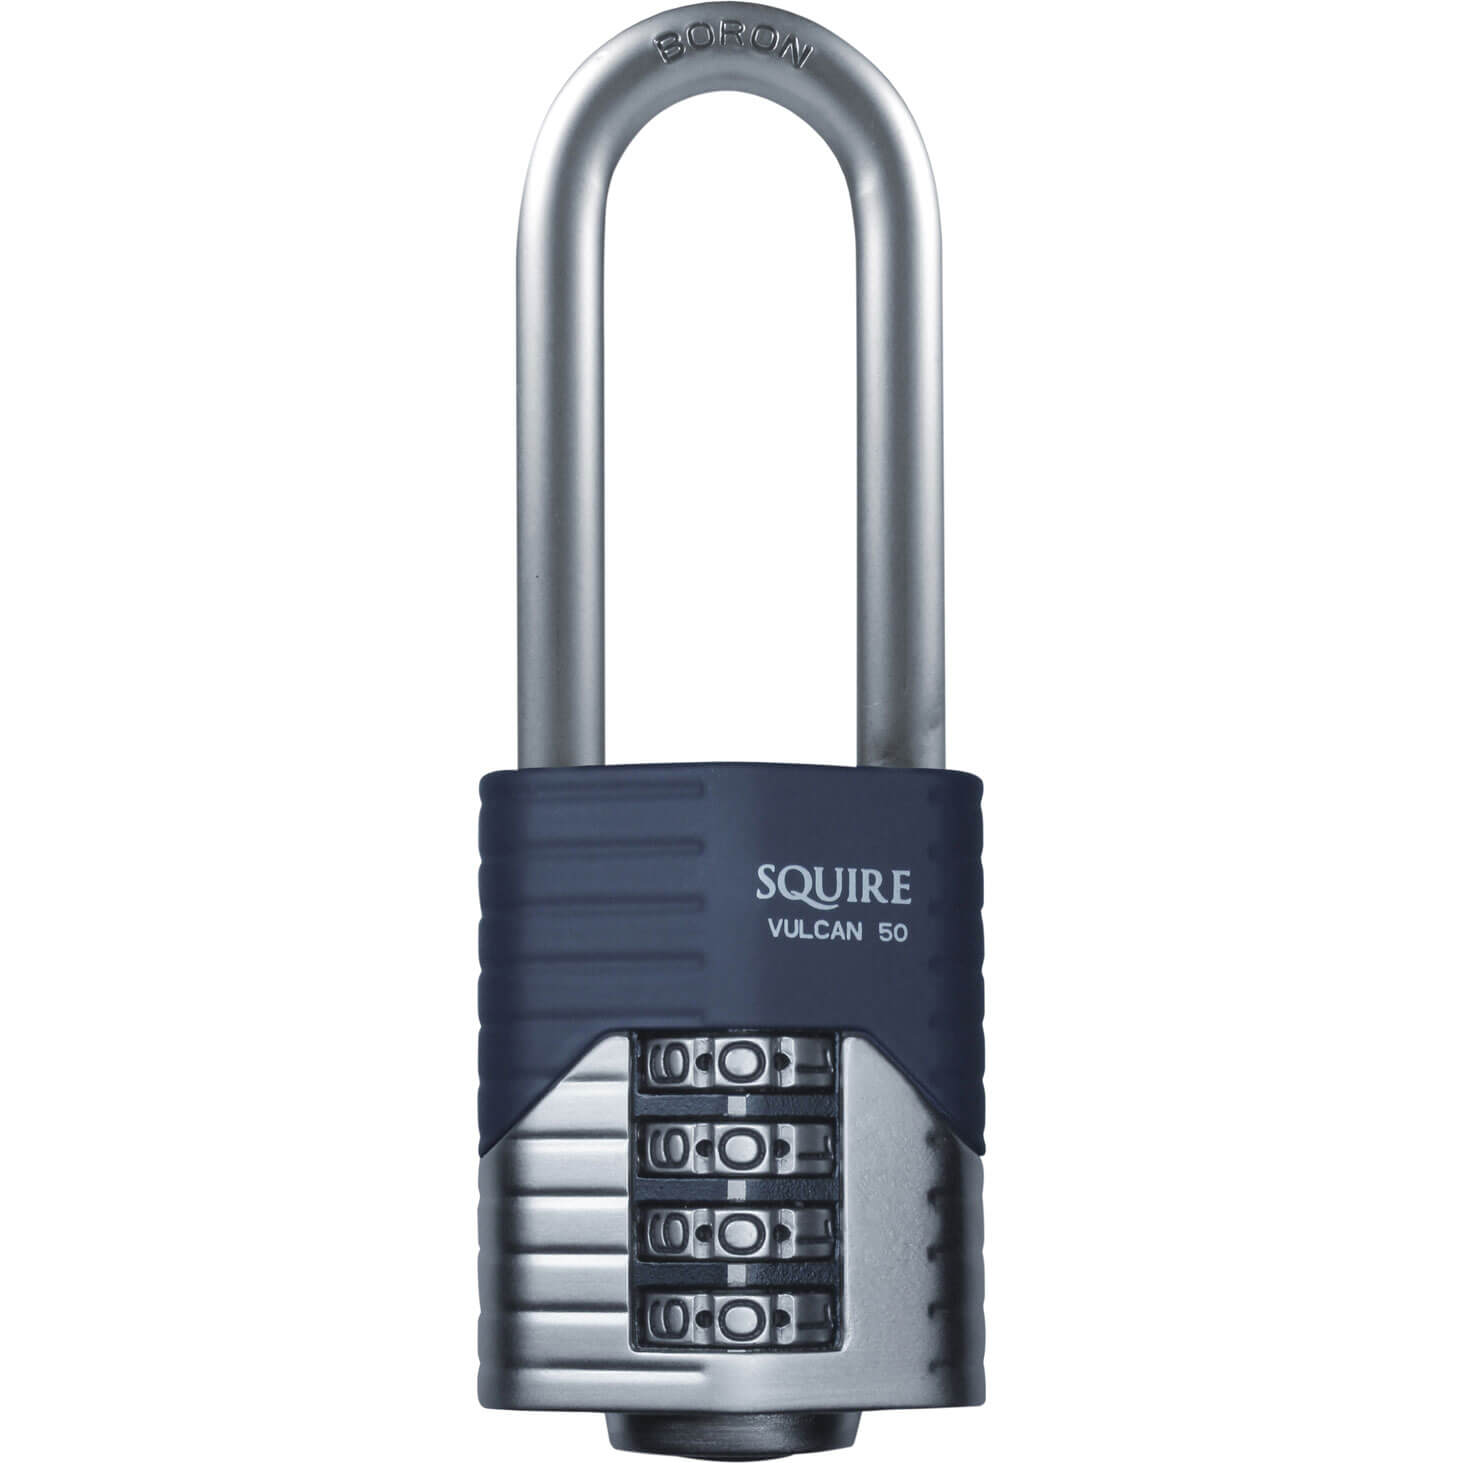 Image of Henry Squire Vulcan Boron Shackle Combination Padlock 40mm Long